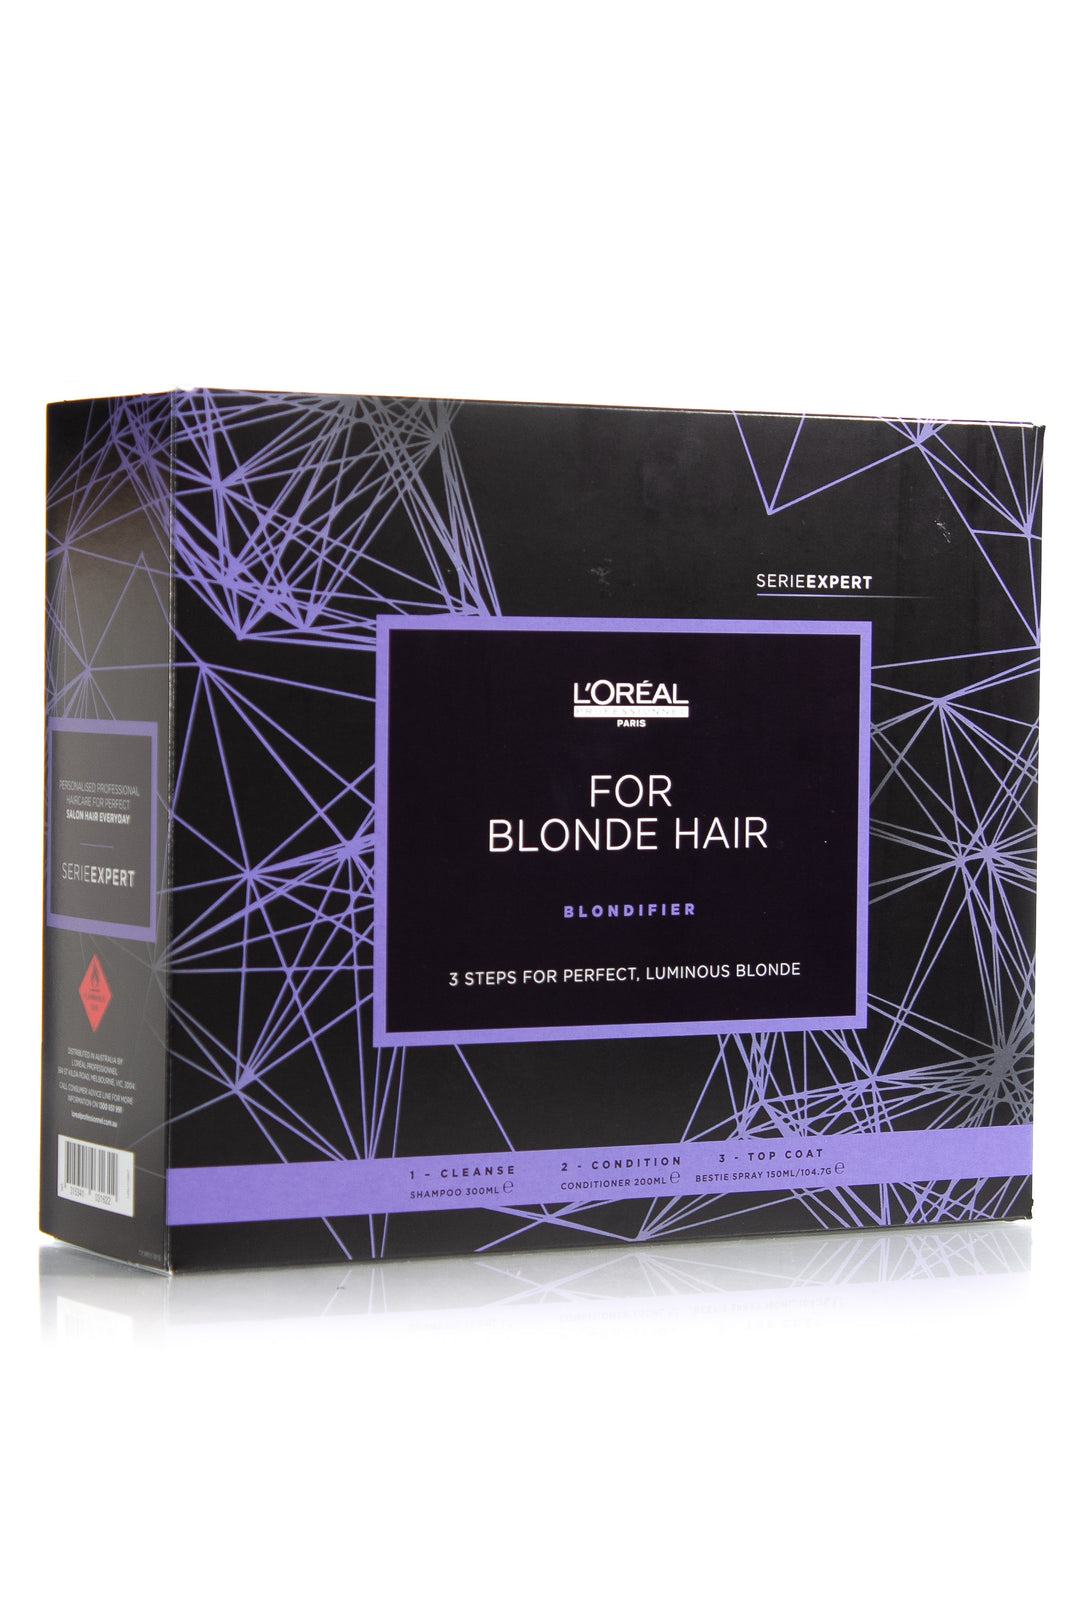 L'OREAL Blondifier Trio Pack